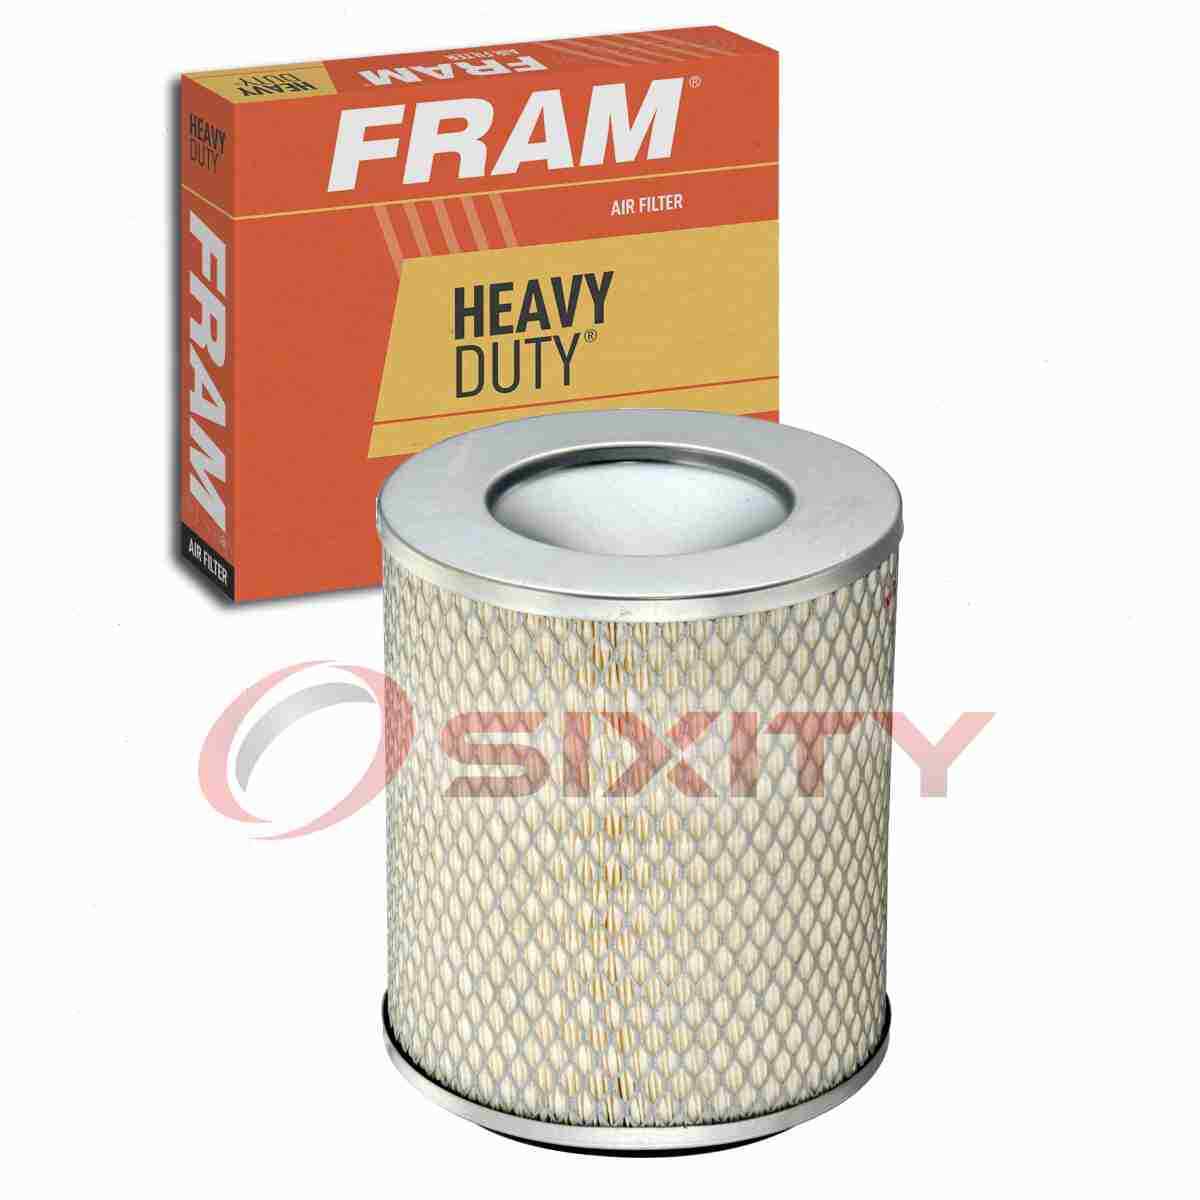 FRAM Heavy Duty Air Filter for 1989-1992 Dodge D250 Intake Inlet Manifold ua